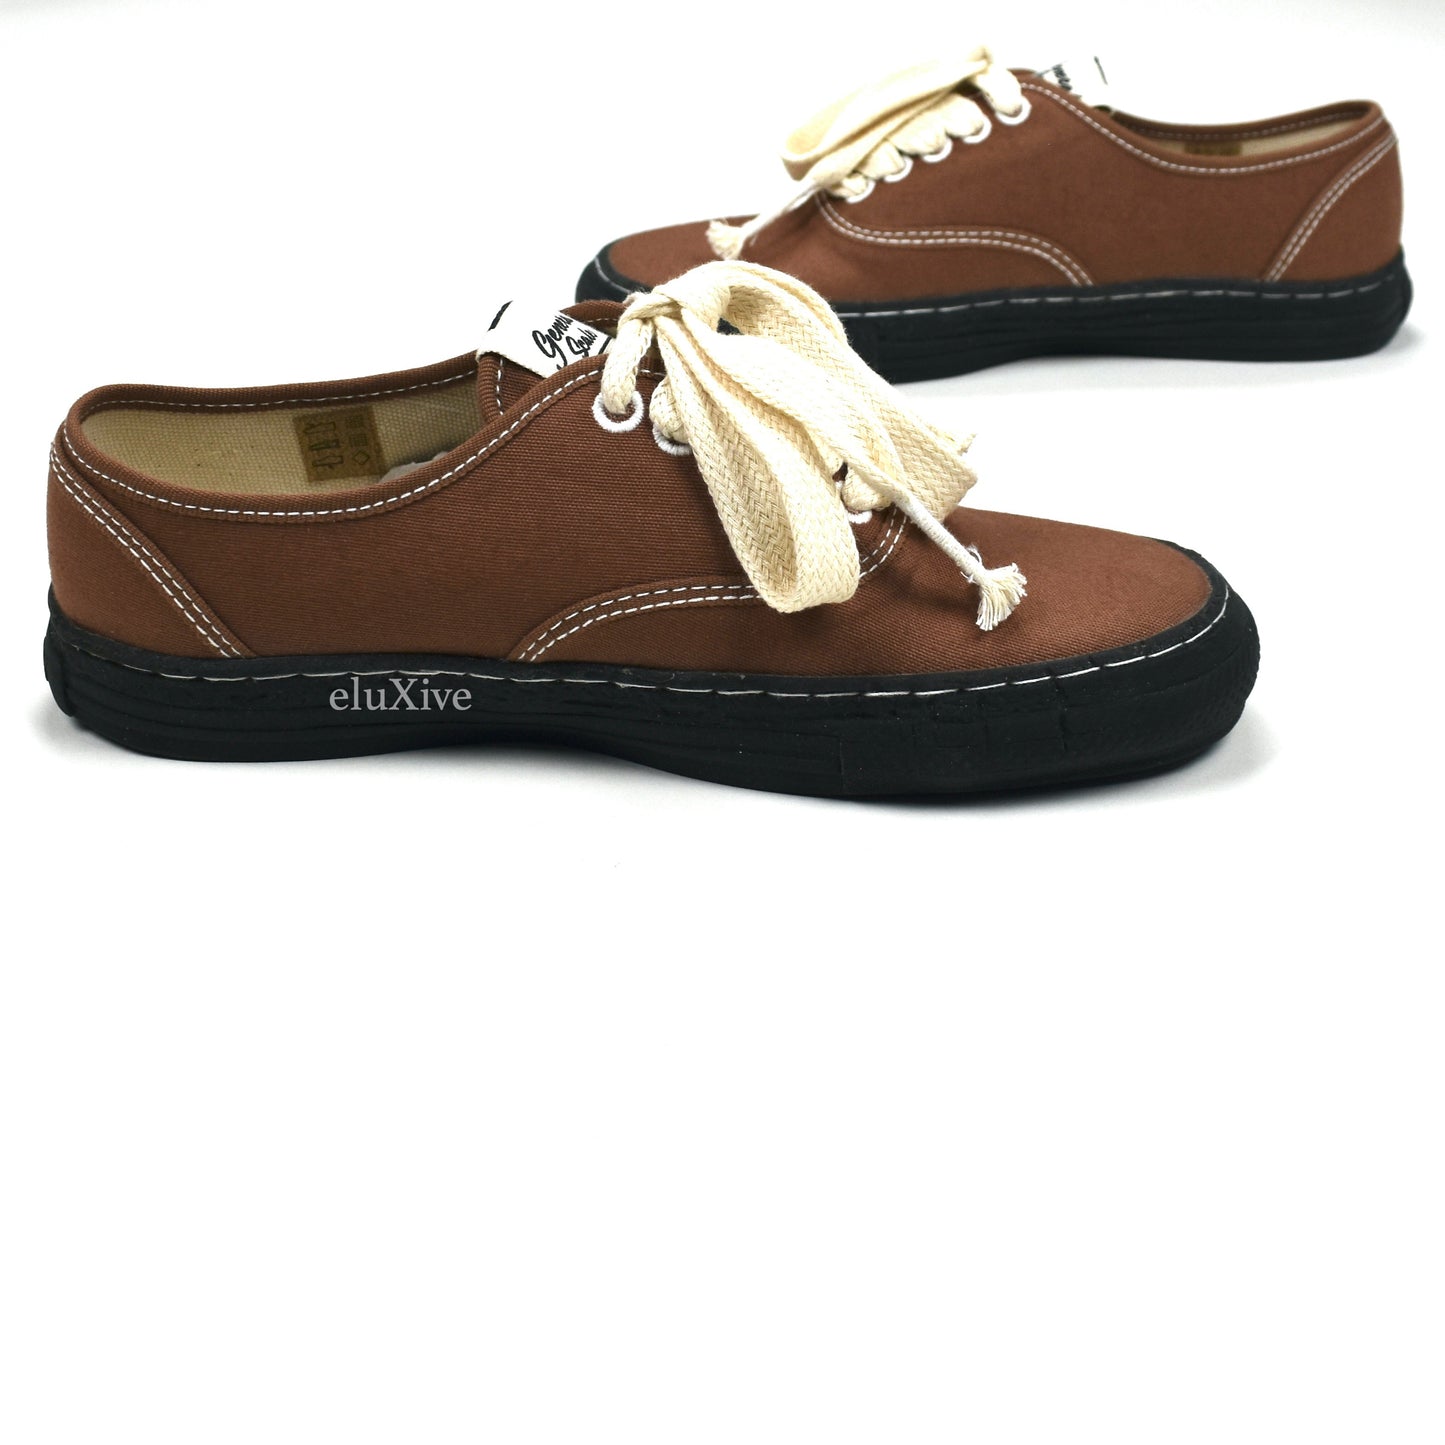 Maison Mihara Yasuhiro - MMY General Scale Sneakers (Brown)